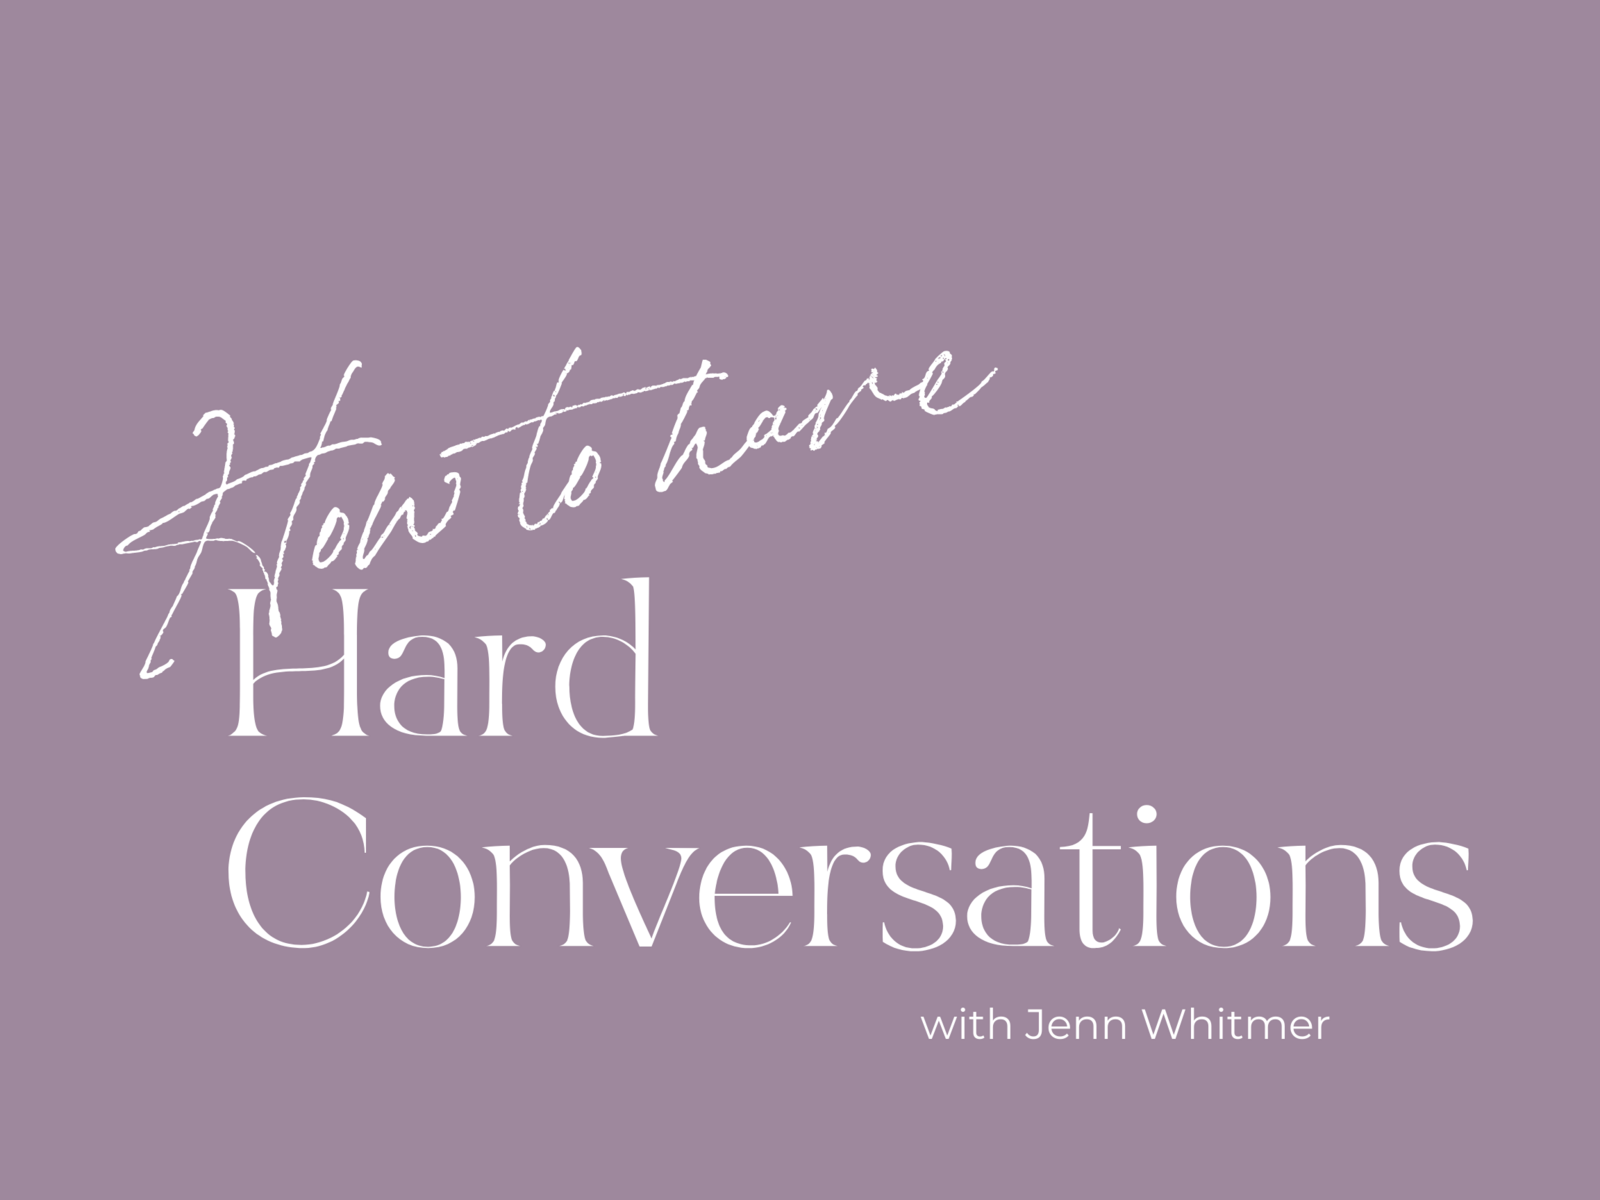 How to have a hard conversation Jenn Whitmer